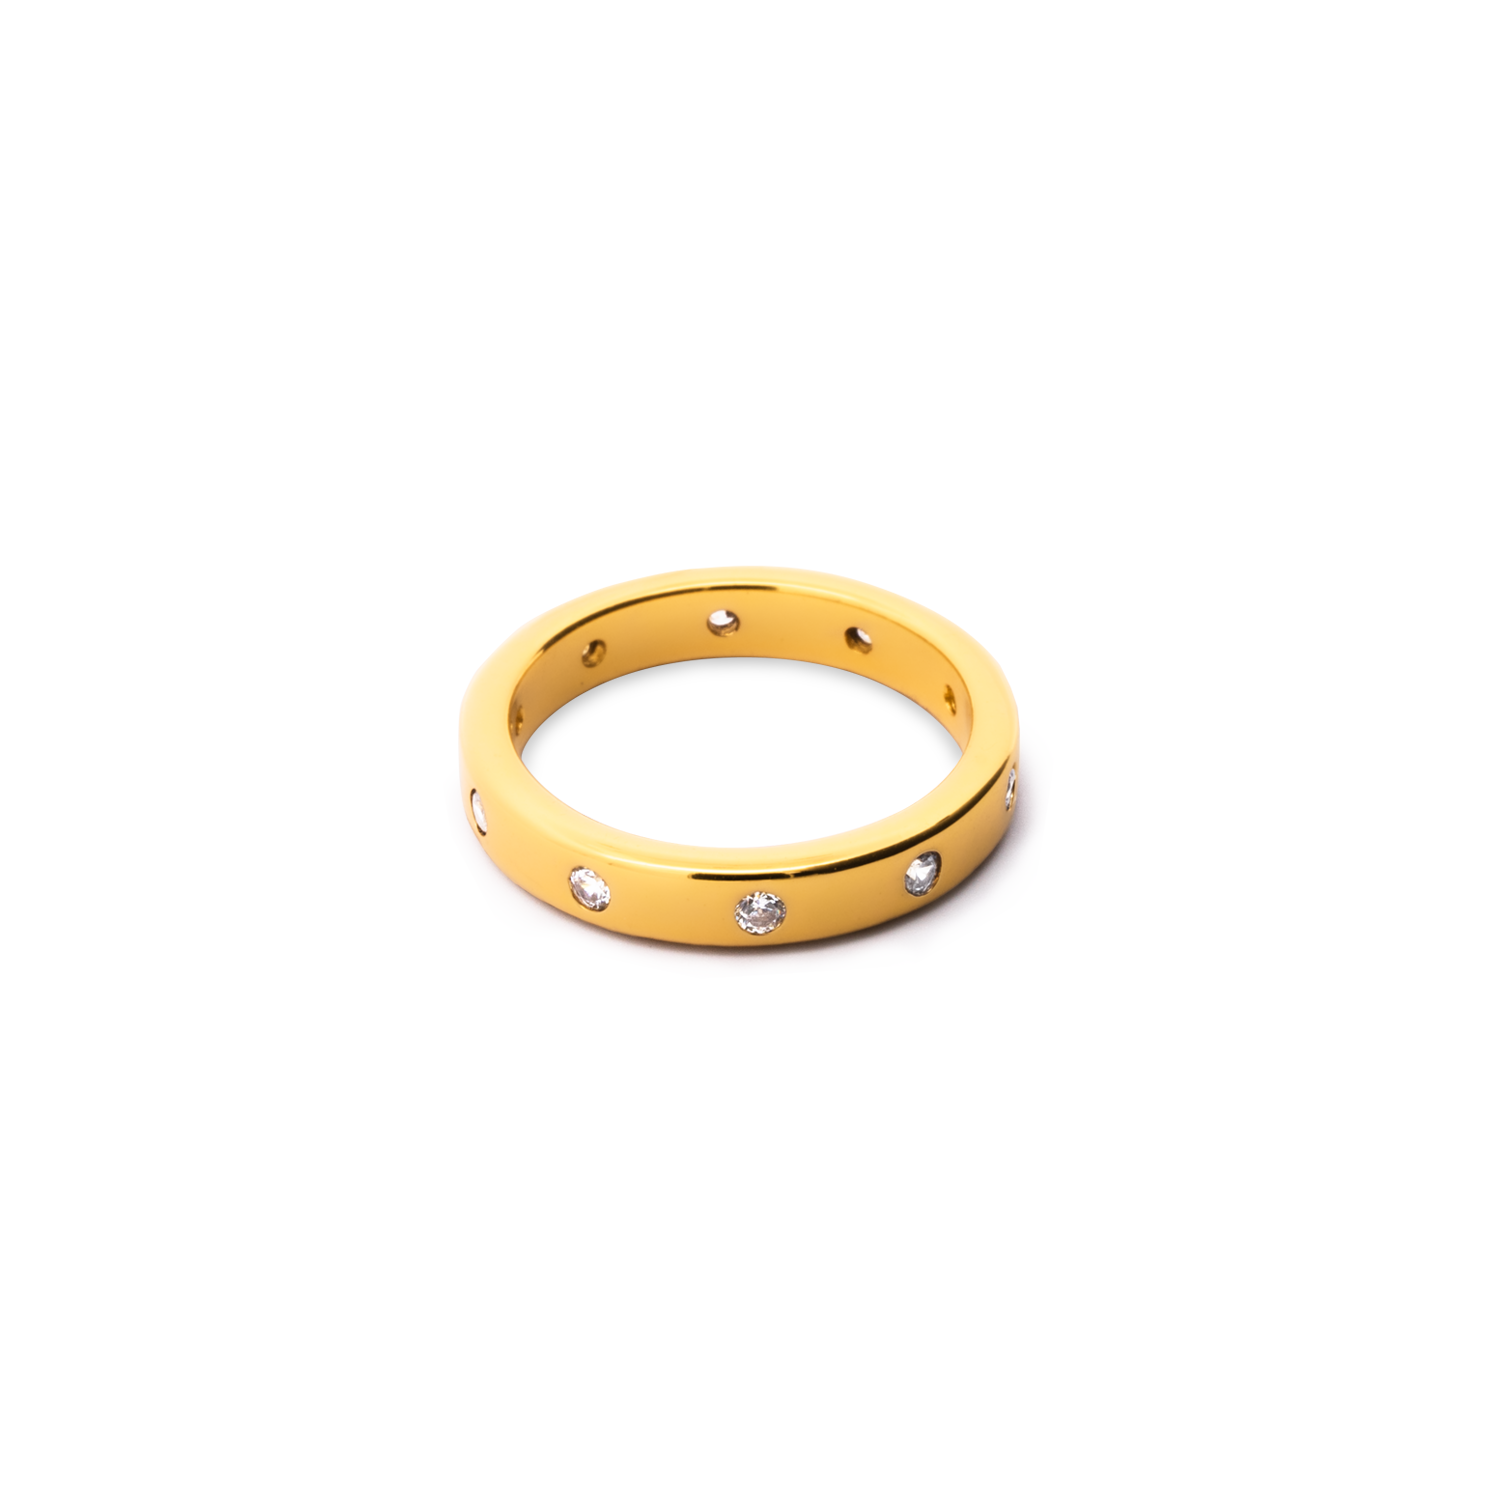 Elegant and minimalist ring in gold, set with cubic zirconia stones.